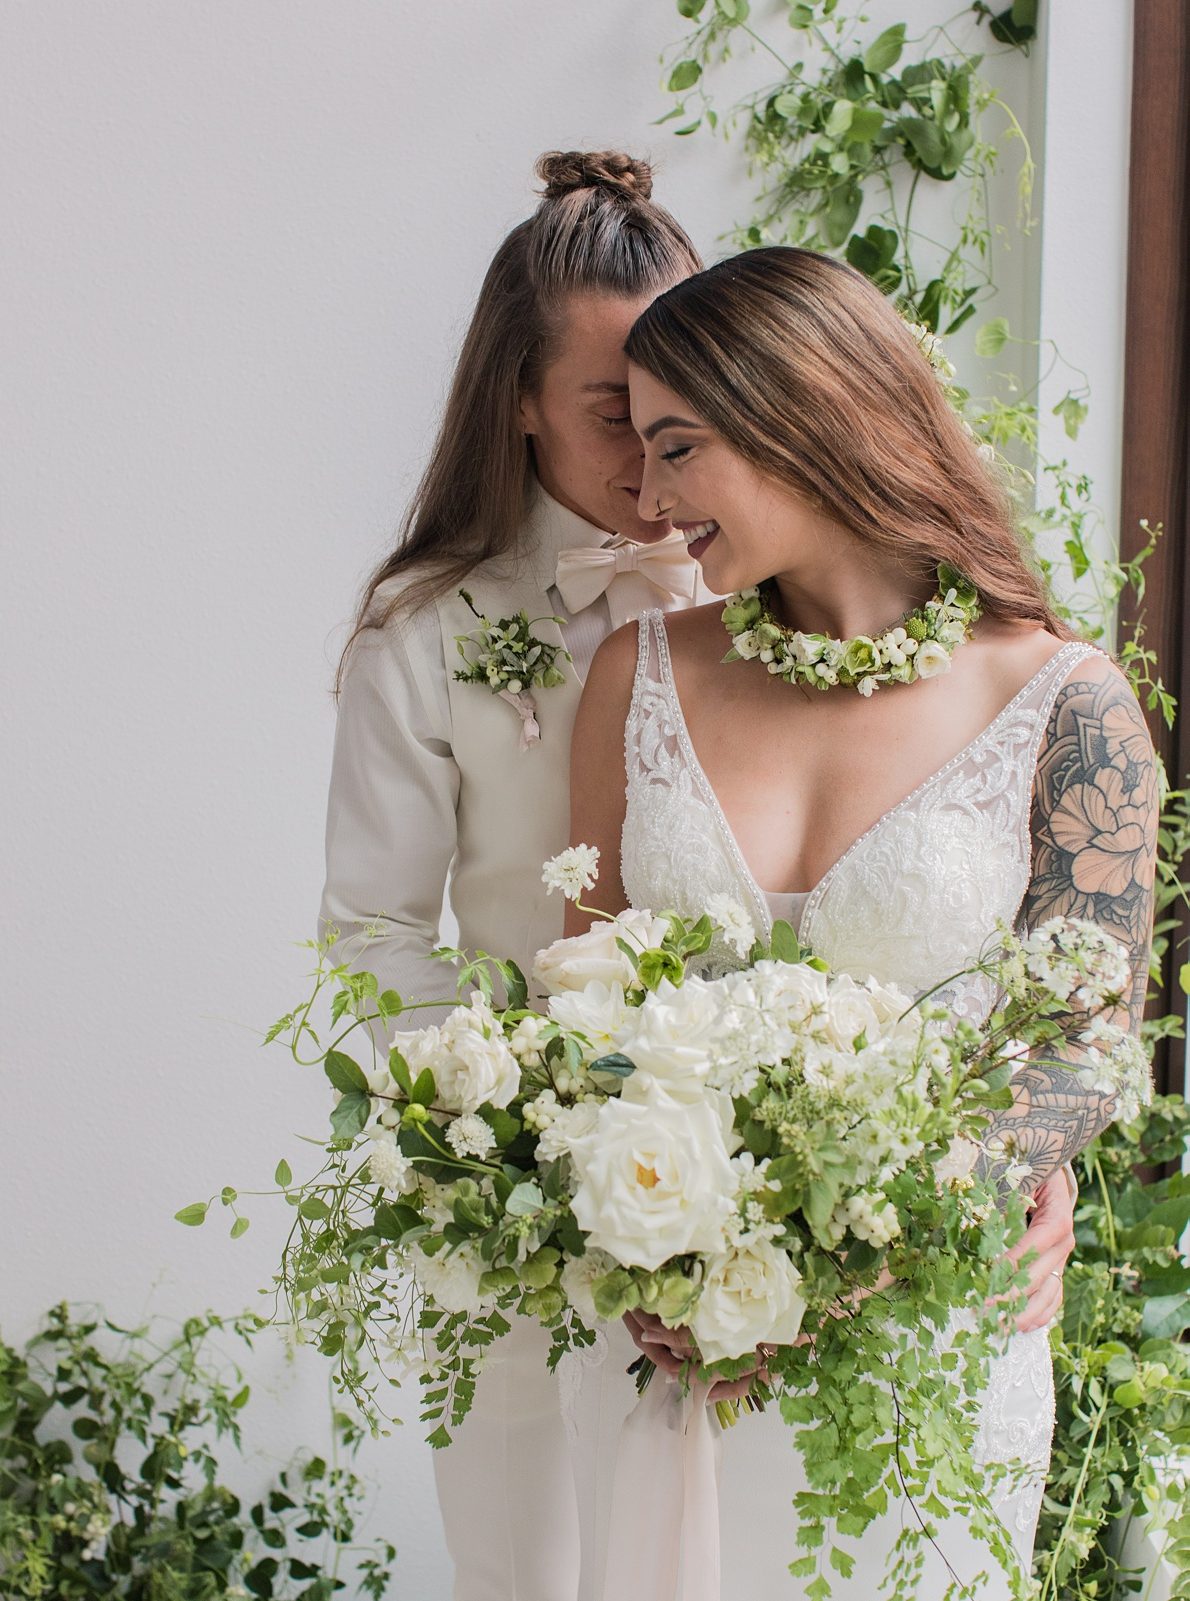 Two brides embracing, holding a white and green bouquet